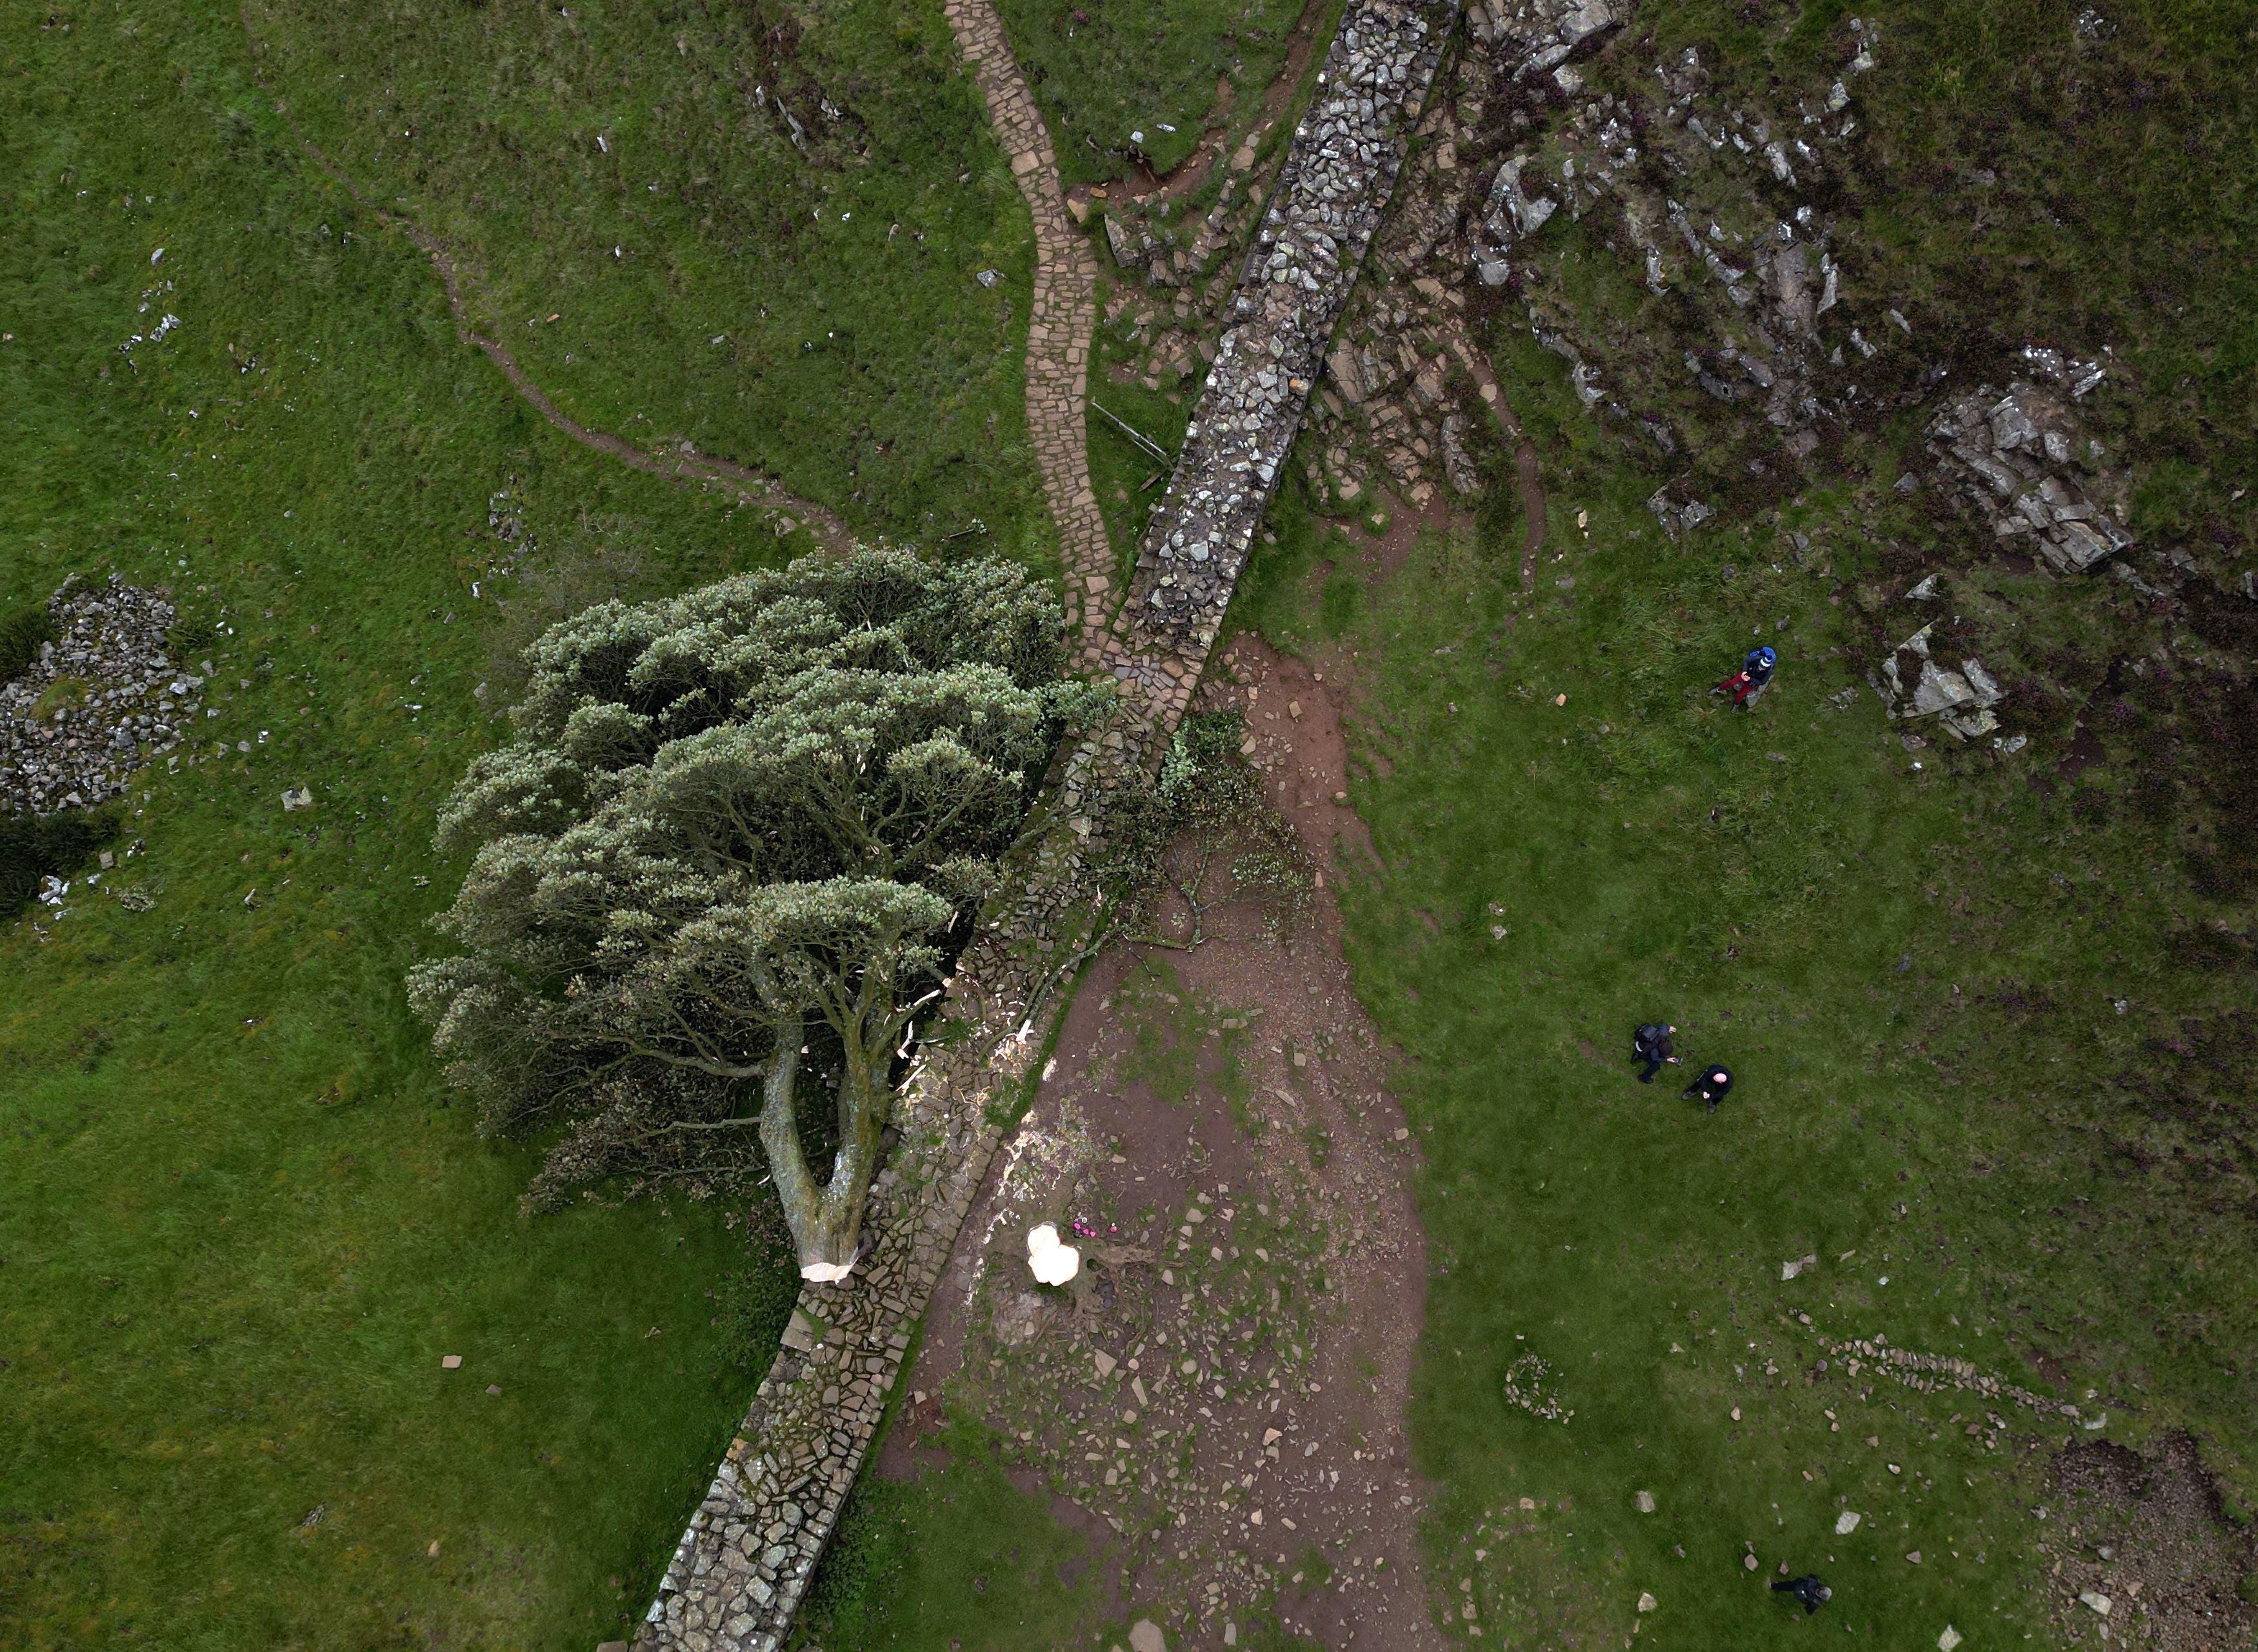 The destruction of Sycamore Gap has prompted an outpouring of anger and sorrow